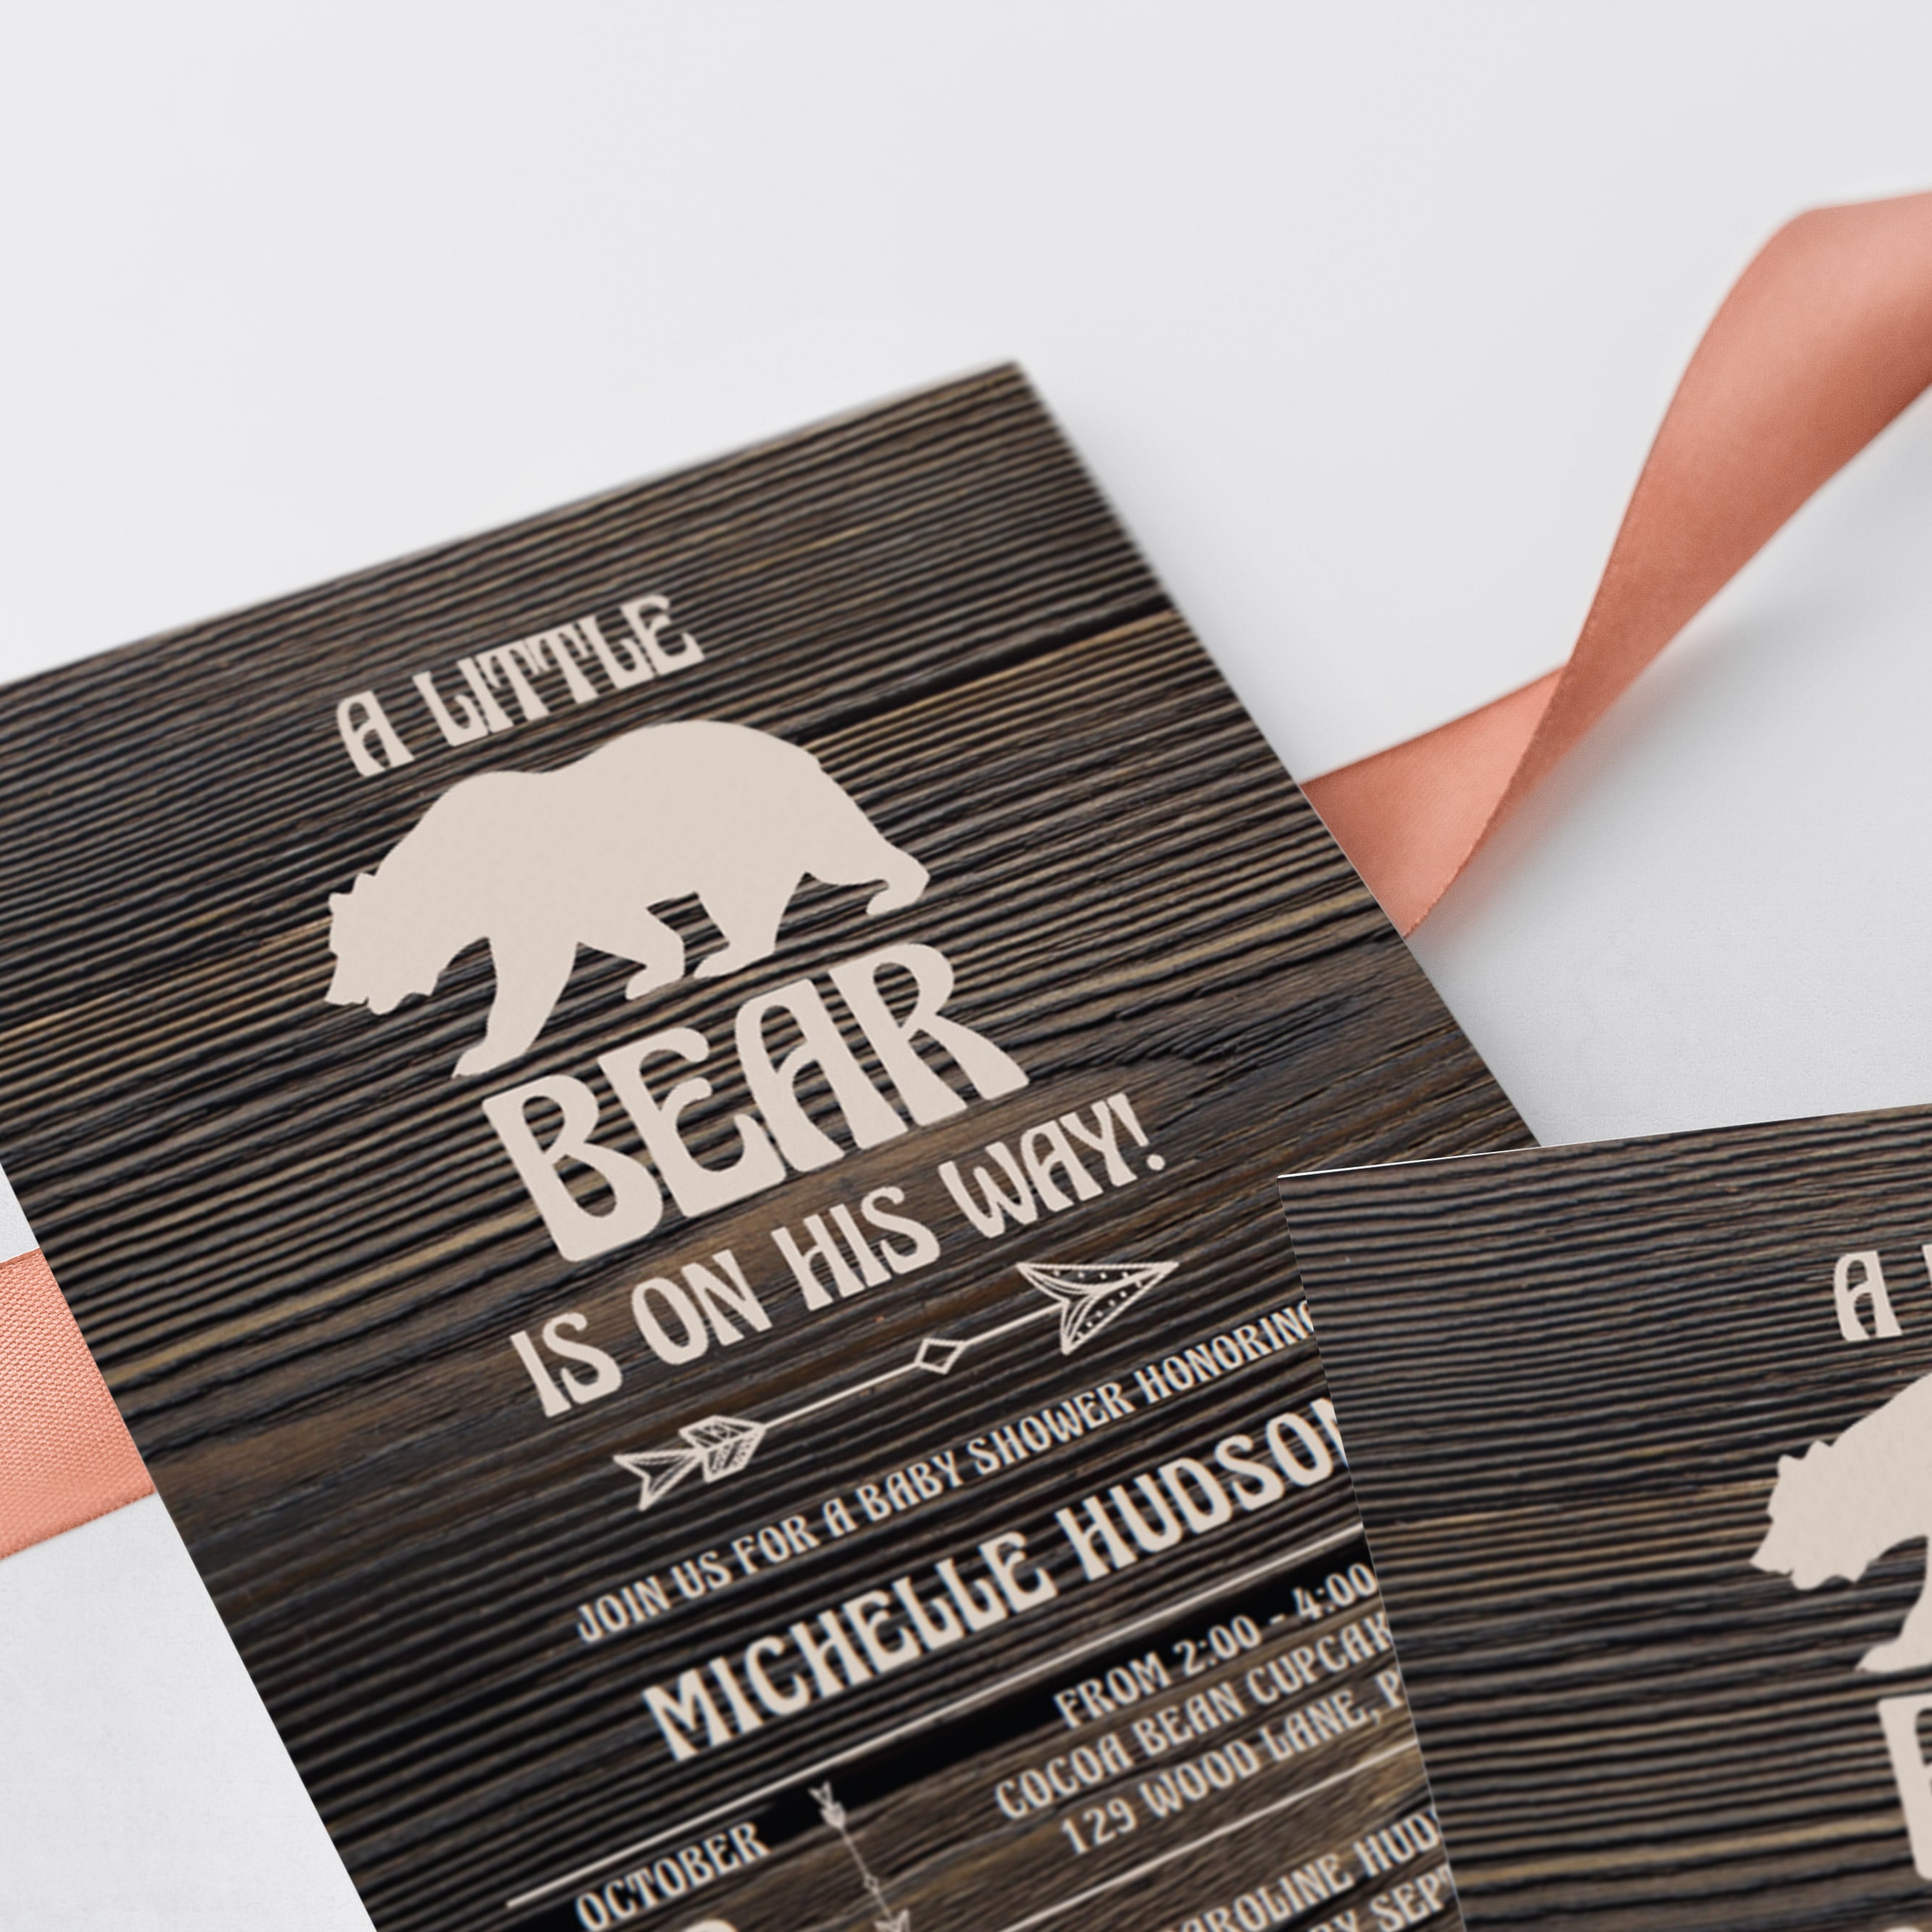 A little bear is on his way shower invite template by LittleSizzle